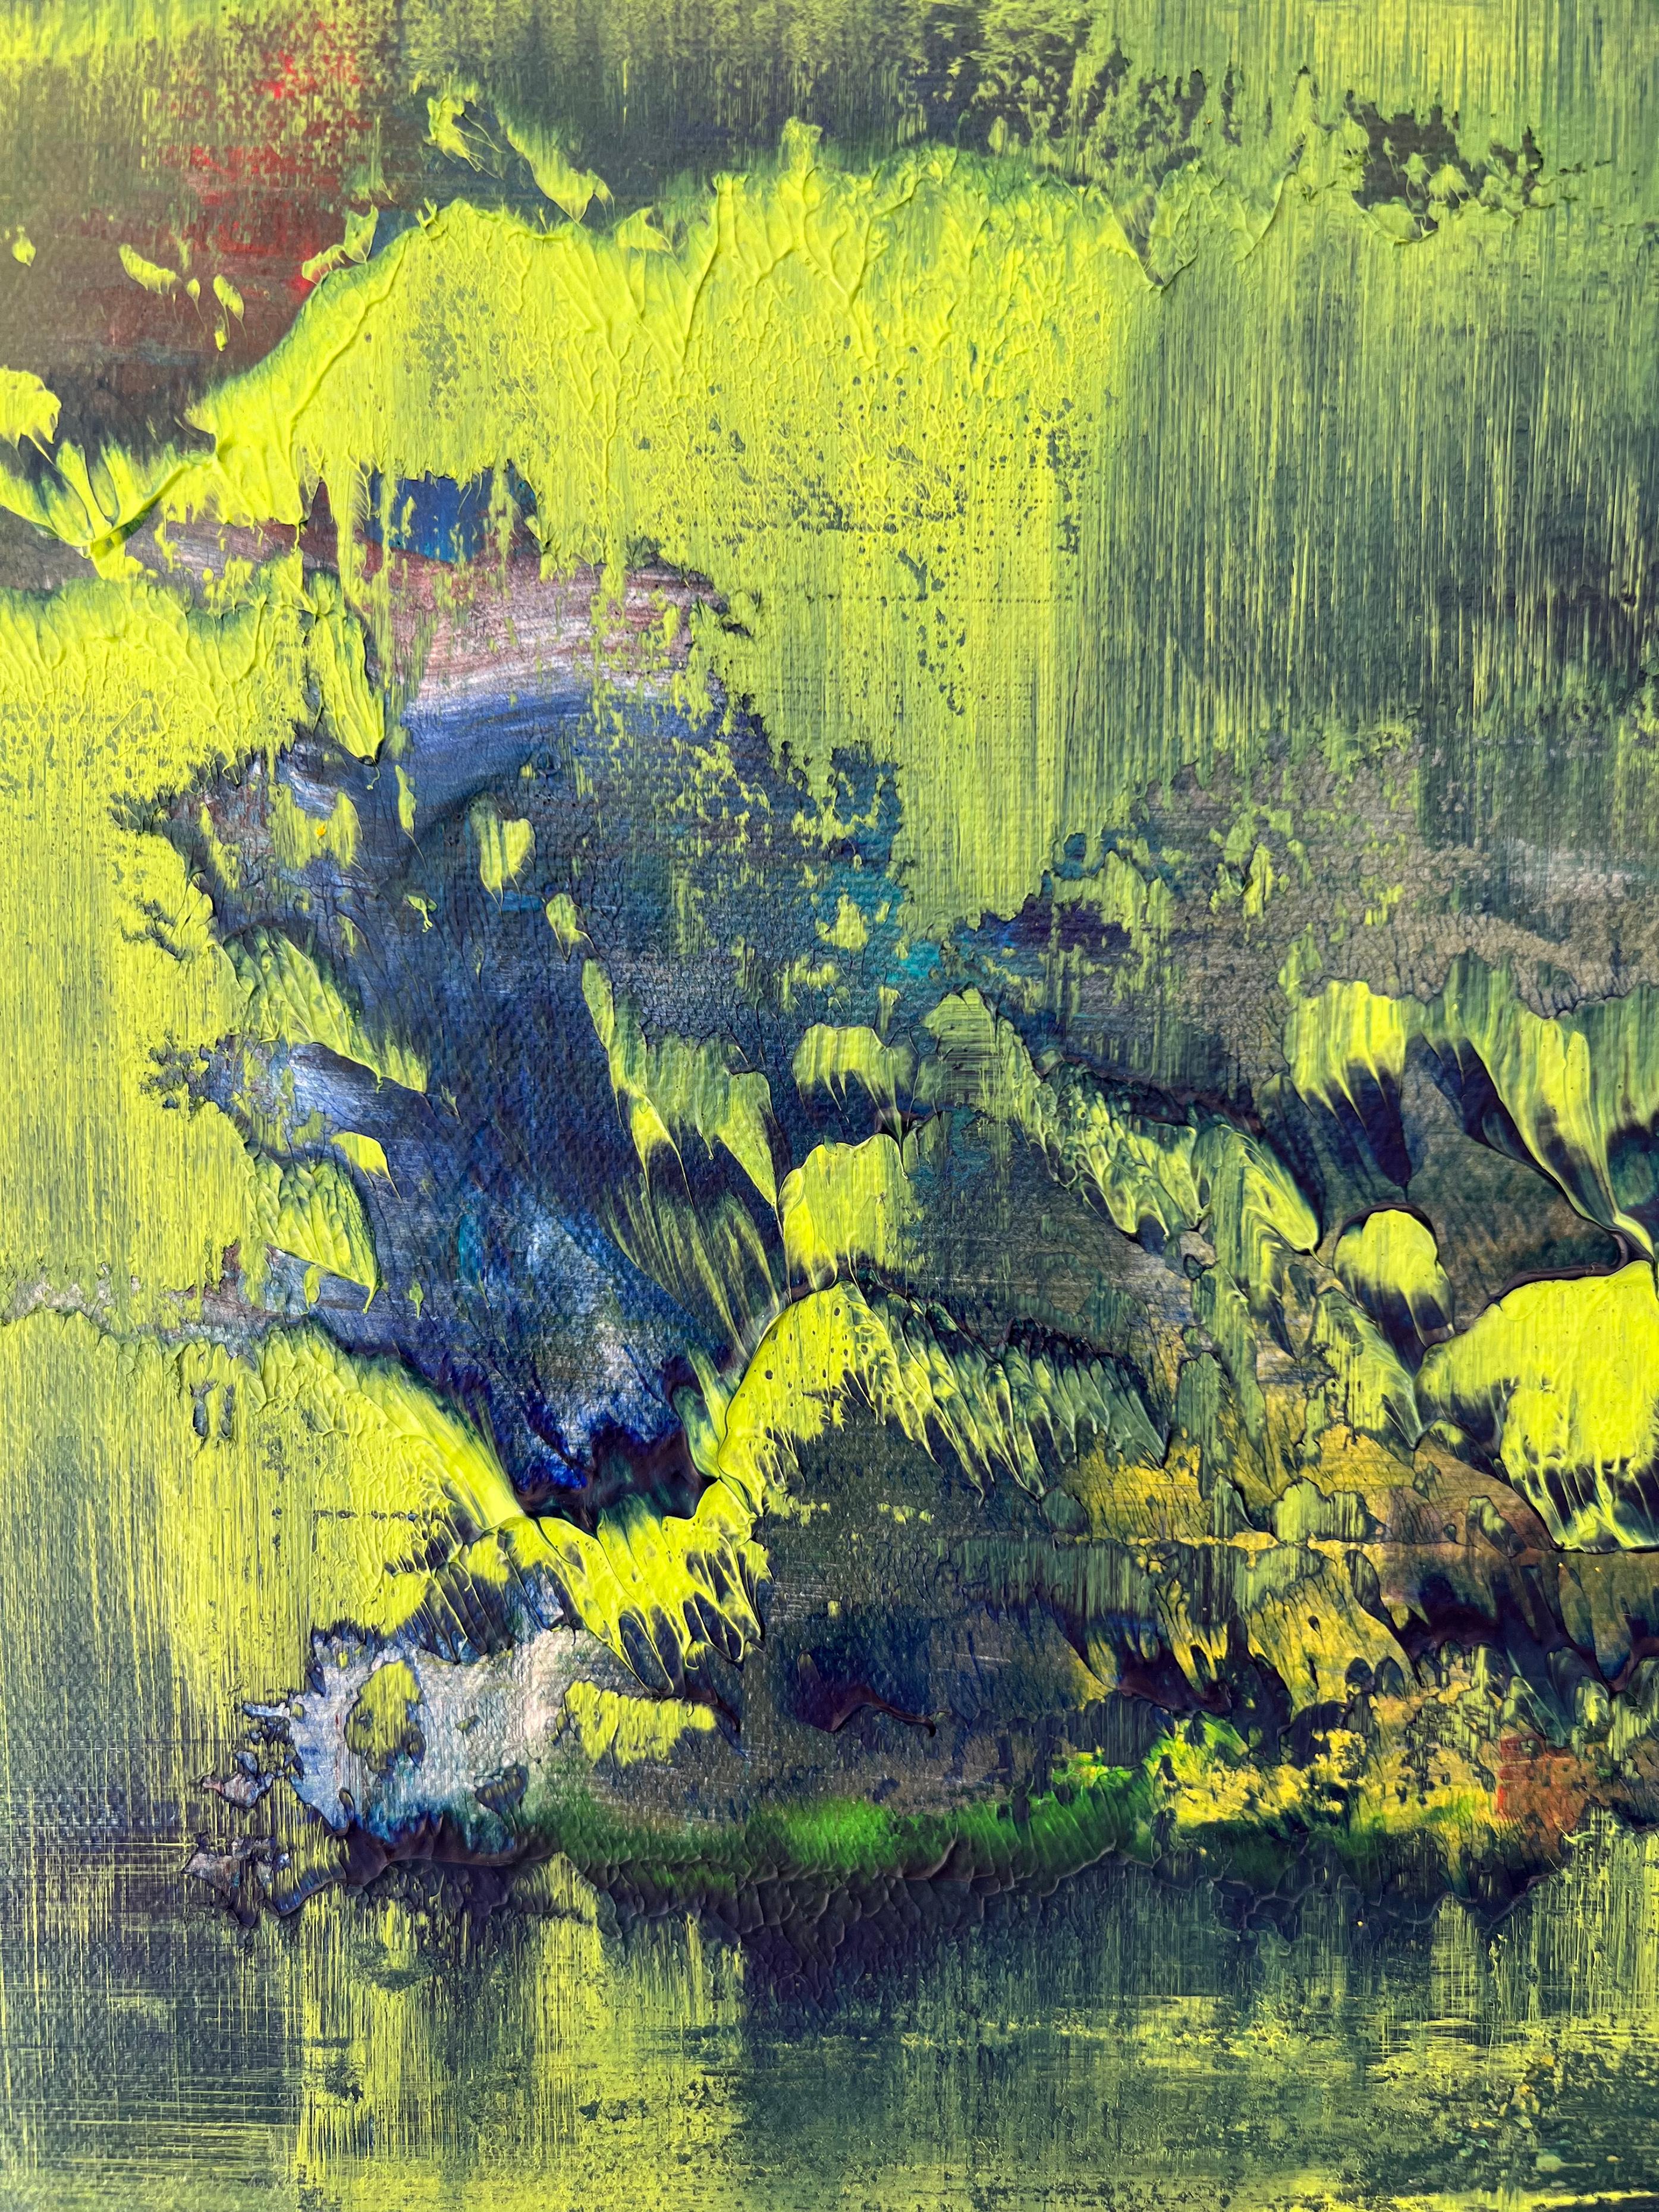 In the Jungle - acrylic on canvas - Abstract Painting by Nina Weintraub